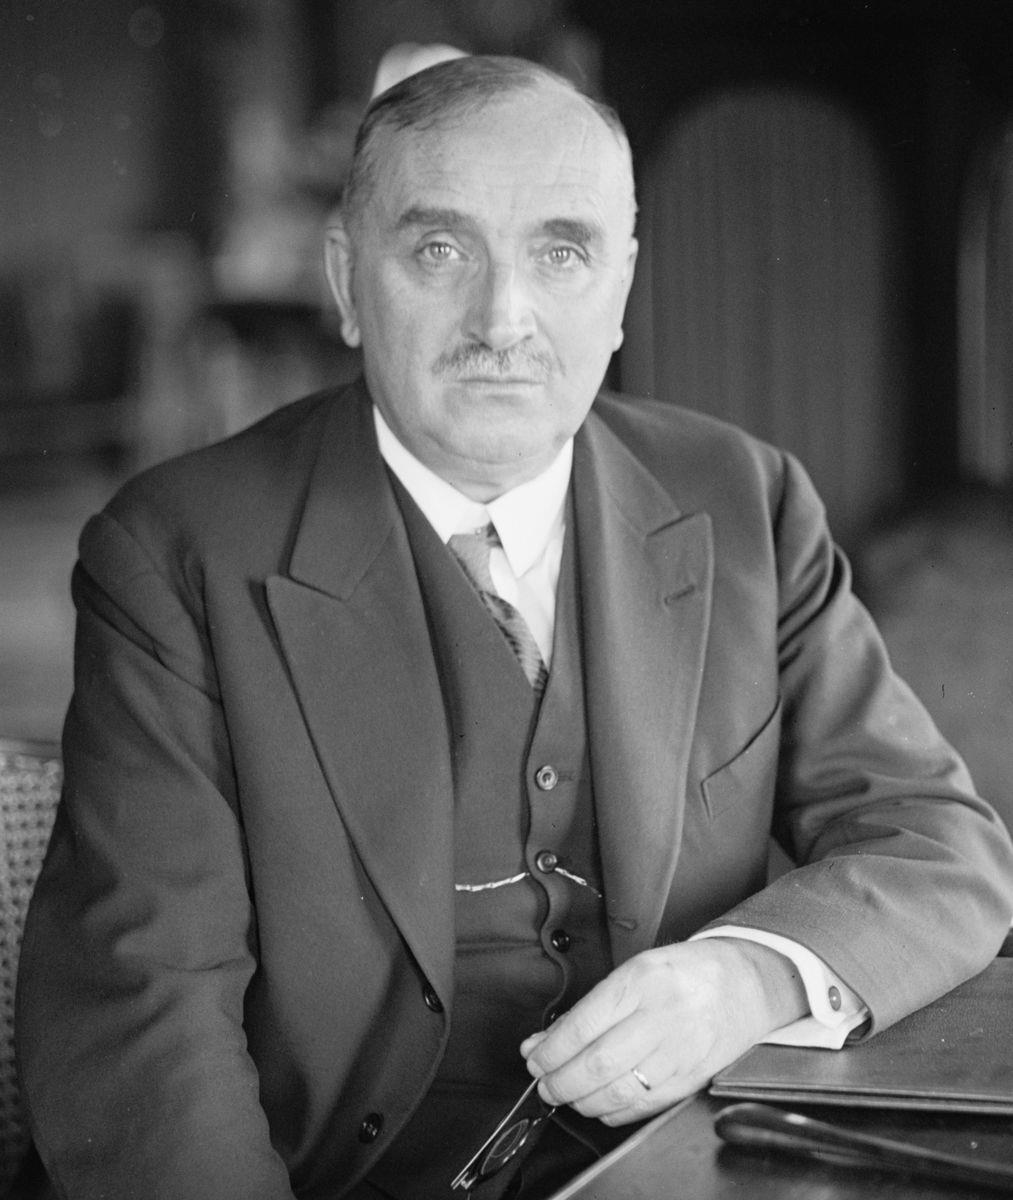 According to his <a href="https://dcwritershomes.wdchumanities.org/paul-claudel/" rel="noreferrer noopener">biographer,</a> academic, diplomat, and playwright Paul Claudel was the most Catholic of French writers and, indeed, fought against secularization of the state. His compassion fell short, however, when it came to <a href="https://www.encyclopedia.com/women/encyclopedias-almanacs-transcripts-and-maps/claudel-camille-1864-1943" rel="noreferrer noopener">ending the forced internment of his sister,</a> sculptor Camille Claudel, following <a href="https://www.newworldencyclopedia.org/entry/Camille_Claudel" rel="noreferrer noopener">episodes of delirious paranoia</a>. For 30 years, Claudel made no effort to get her out of an asylum. In fact, some sources report that he was ashamed of her presumed madness.